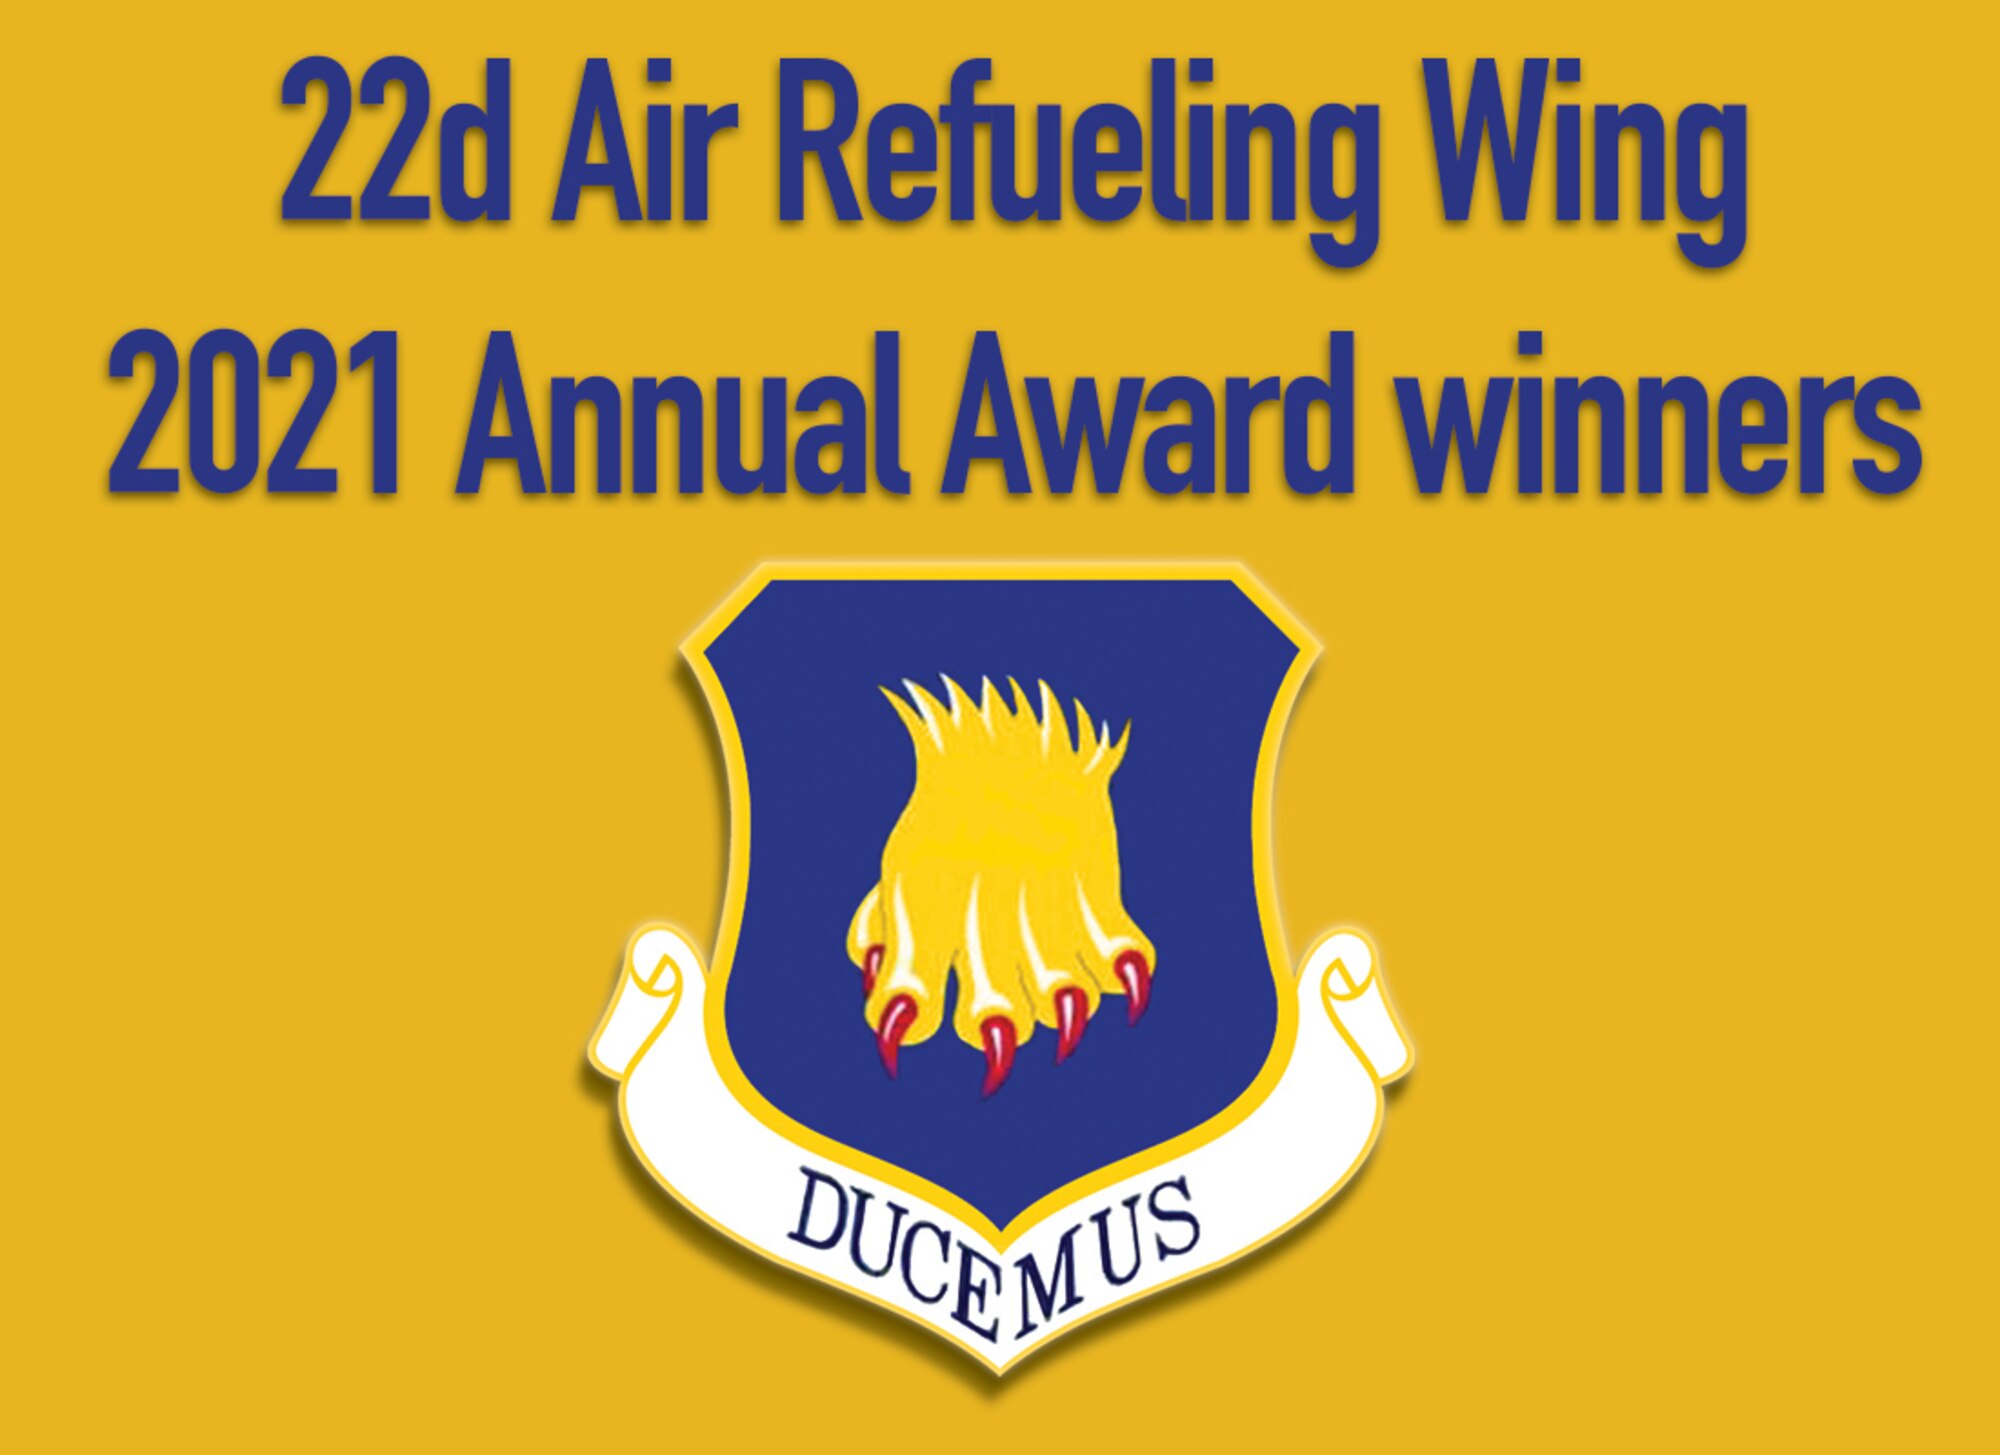 The 22nd Air Refueling Wing announced its 2021 annual awards winners in a ceremony on Feb. 25, 2022, at McConnell Air Force Base.